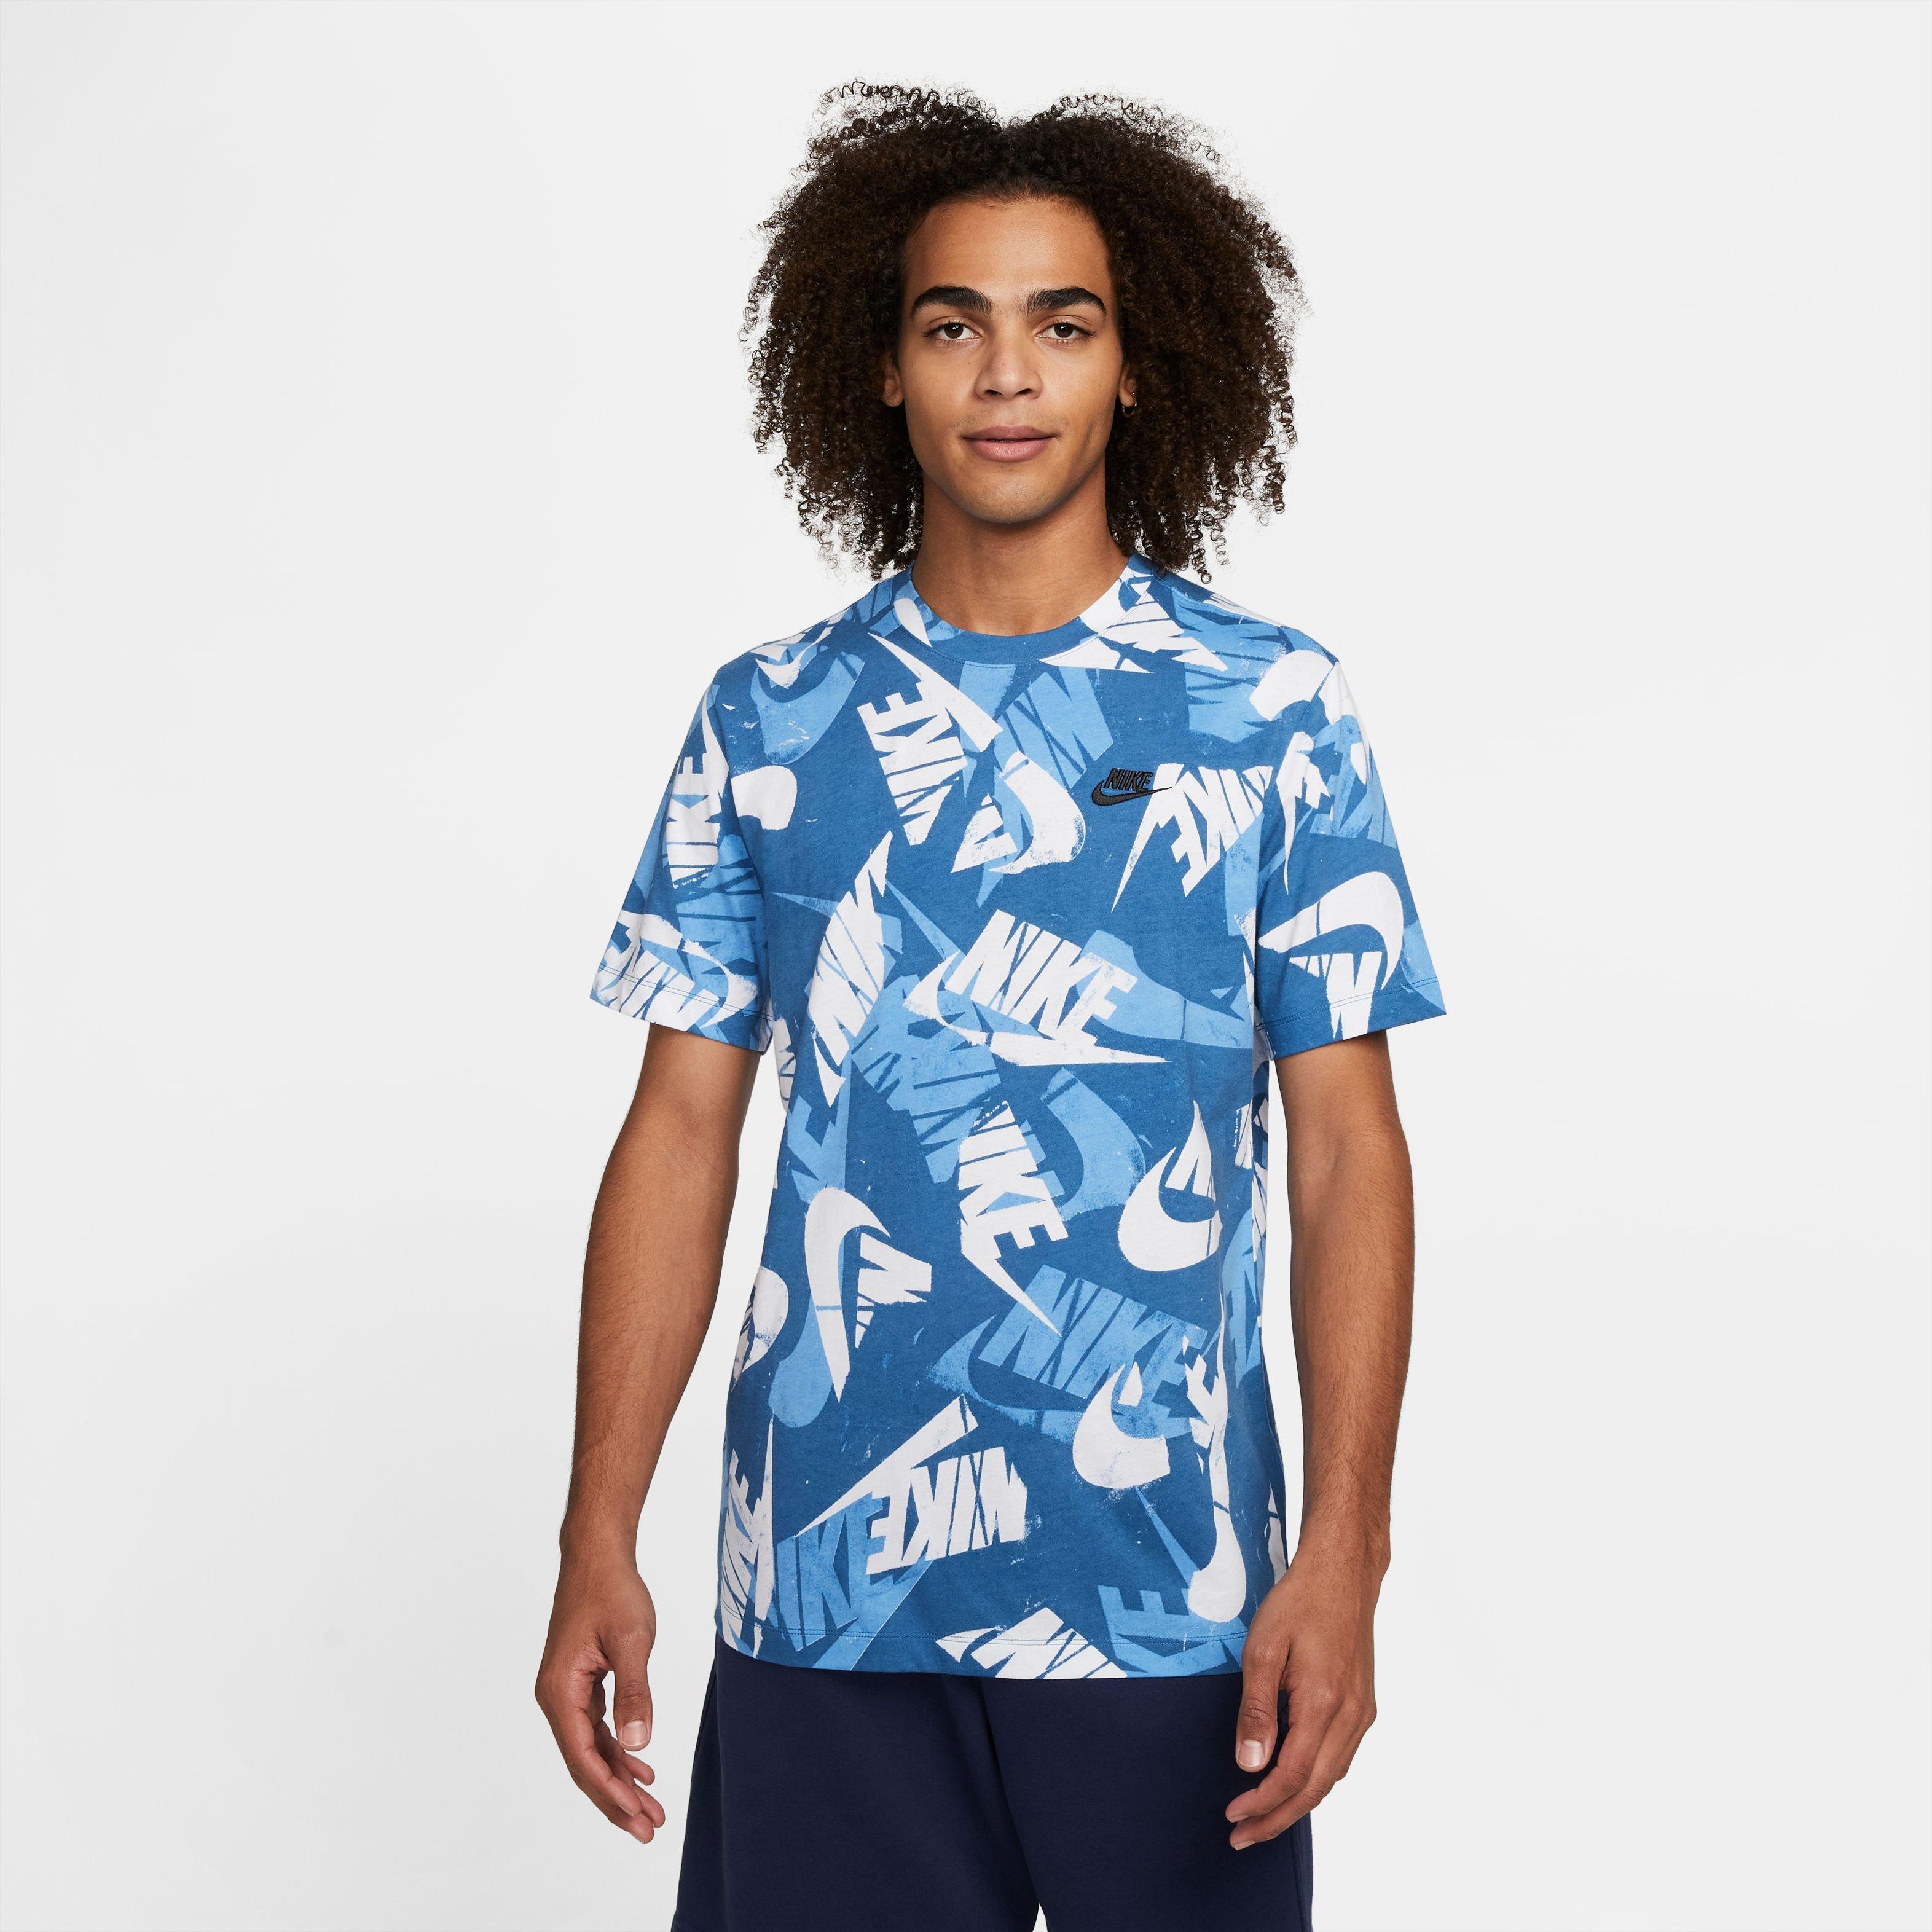 Men's Blue Nike T-Shirts: 100+ Items in Stock